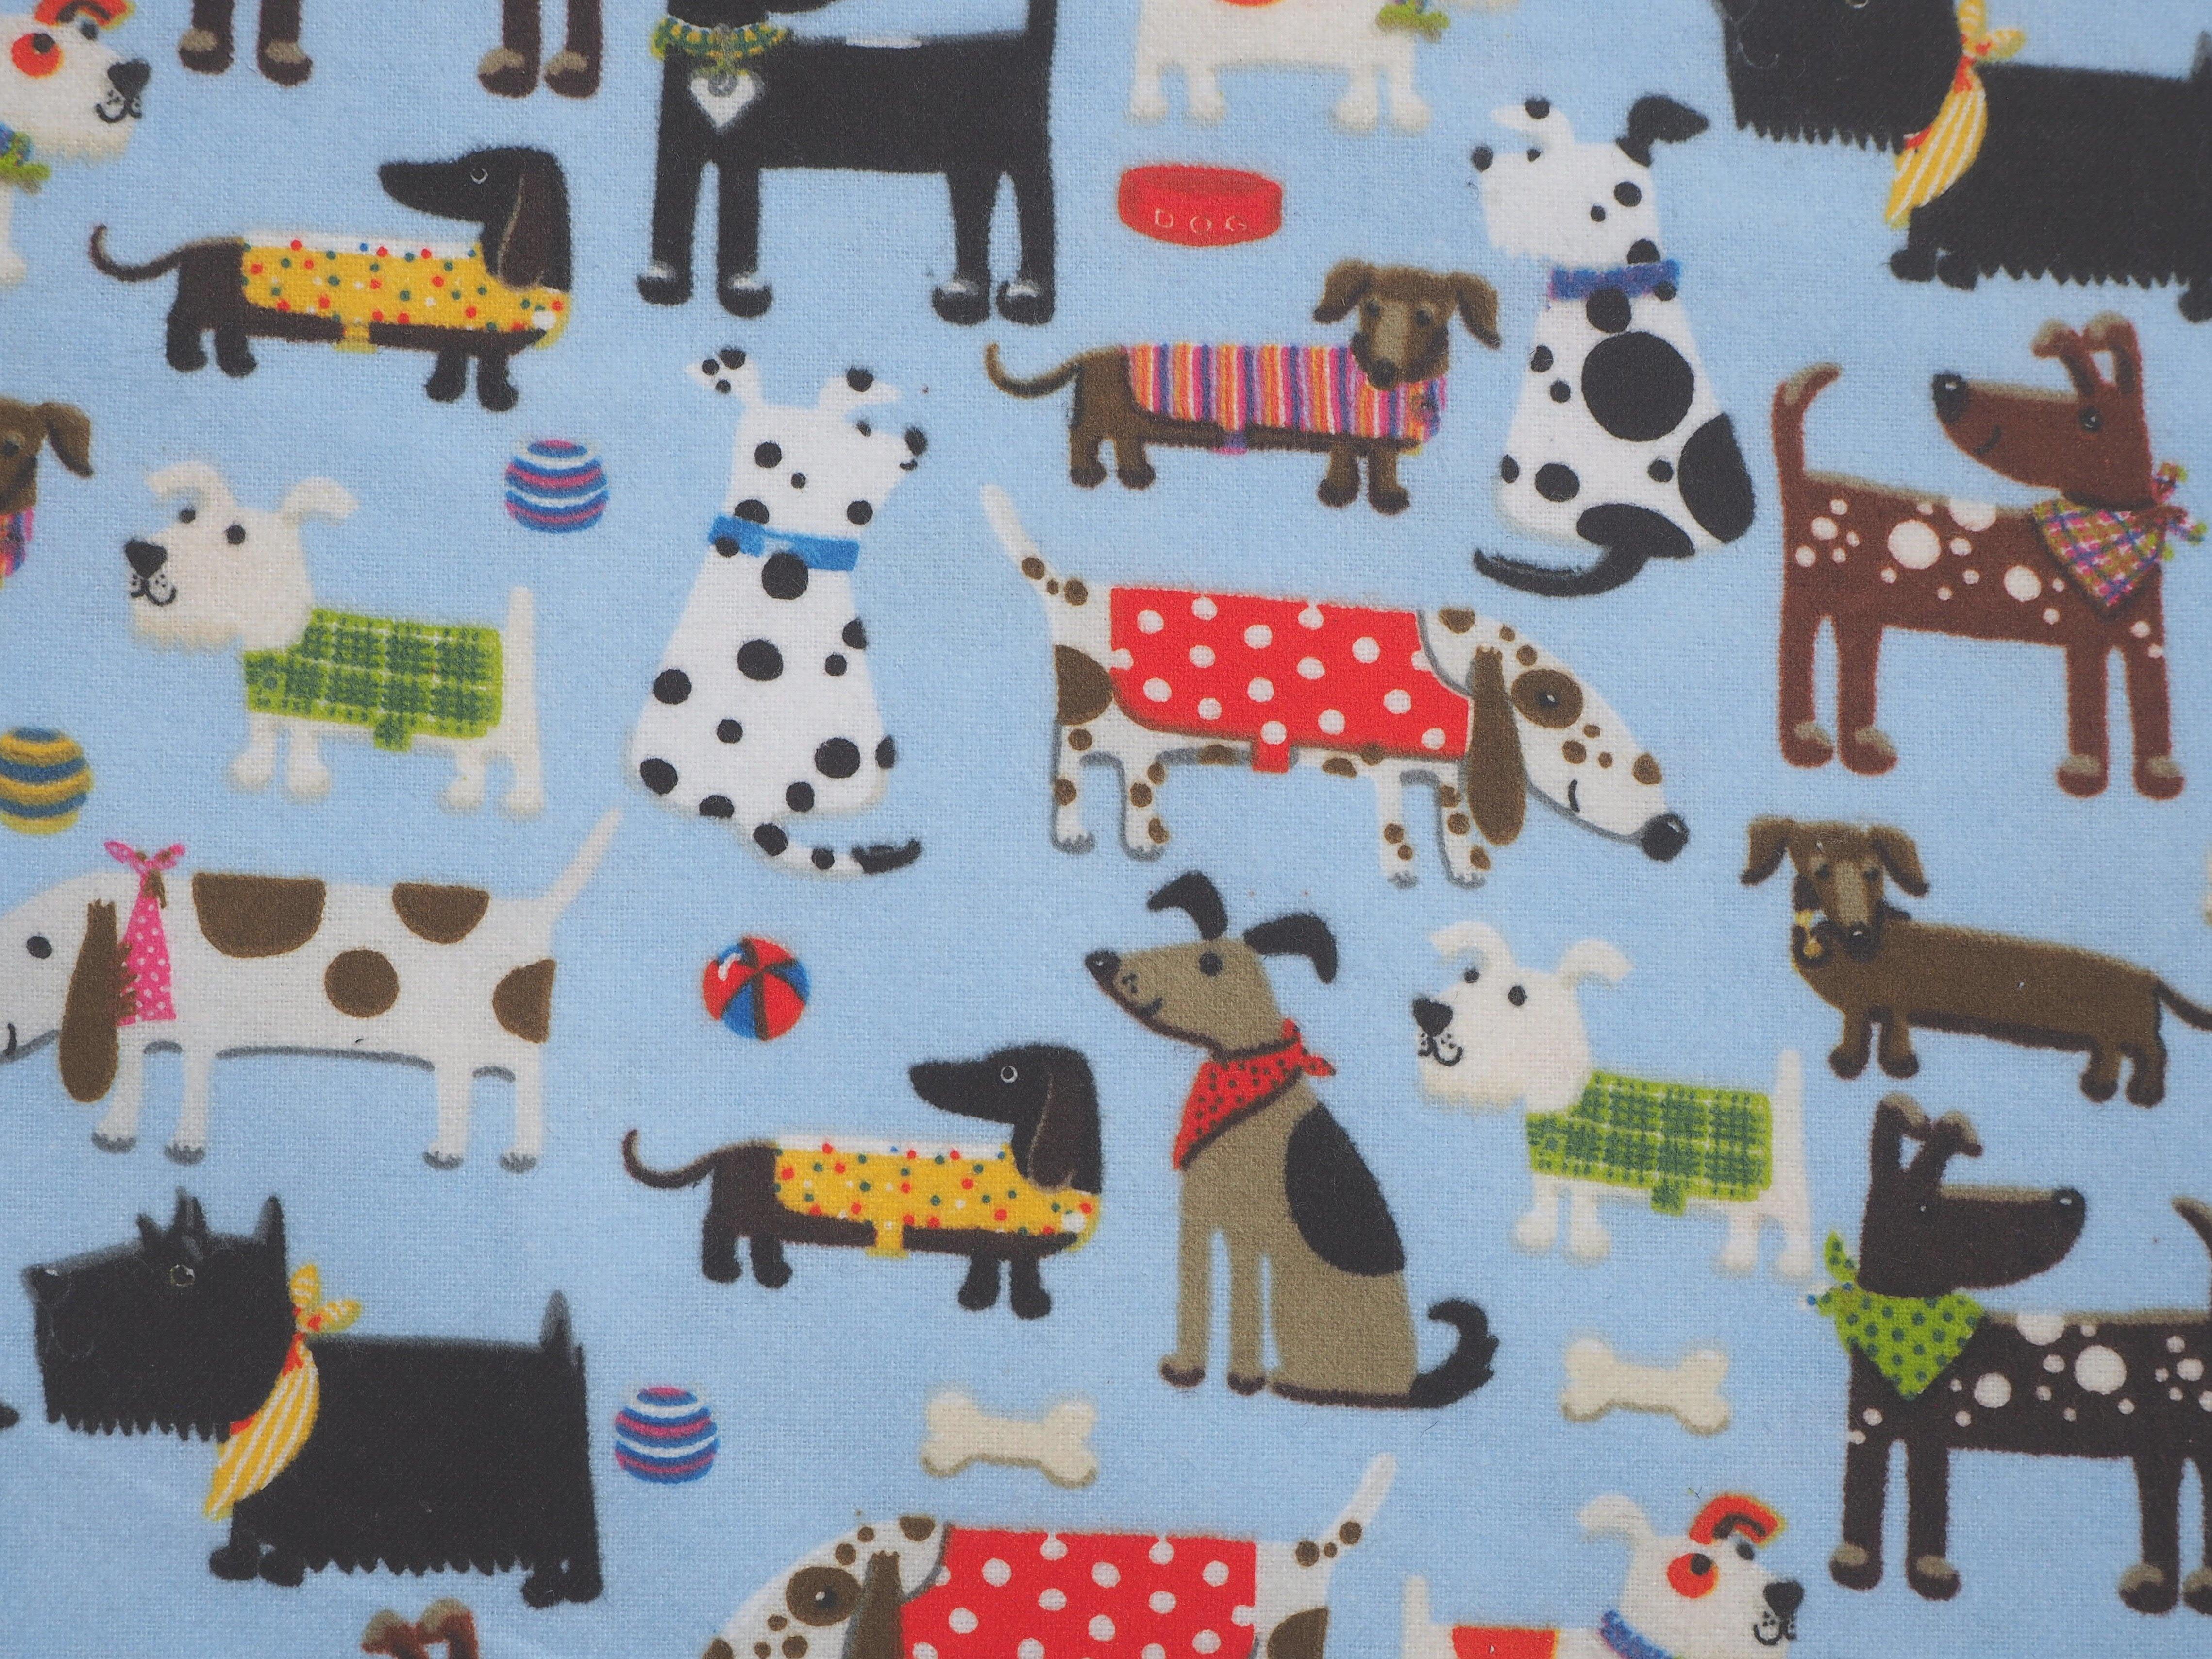 Dressed Up Fancy Dogs print, on soft & fluffy blue flannelette, 100% cotton fabric